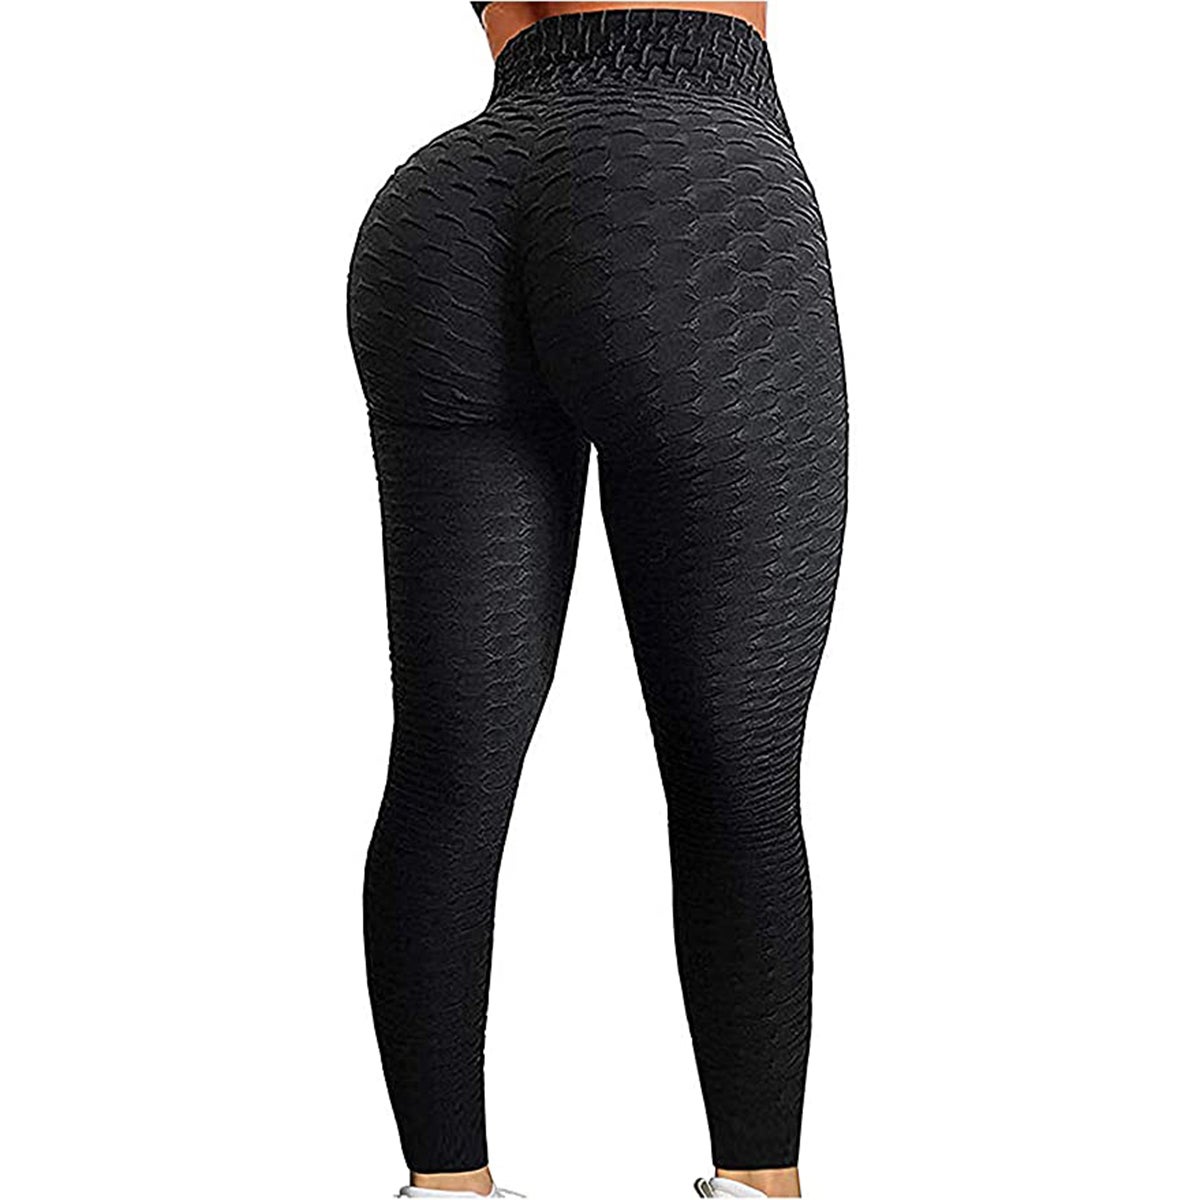 These Booty-Lifting Leggings From  Are Going Viral on TikTok